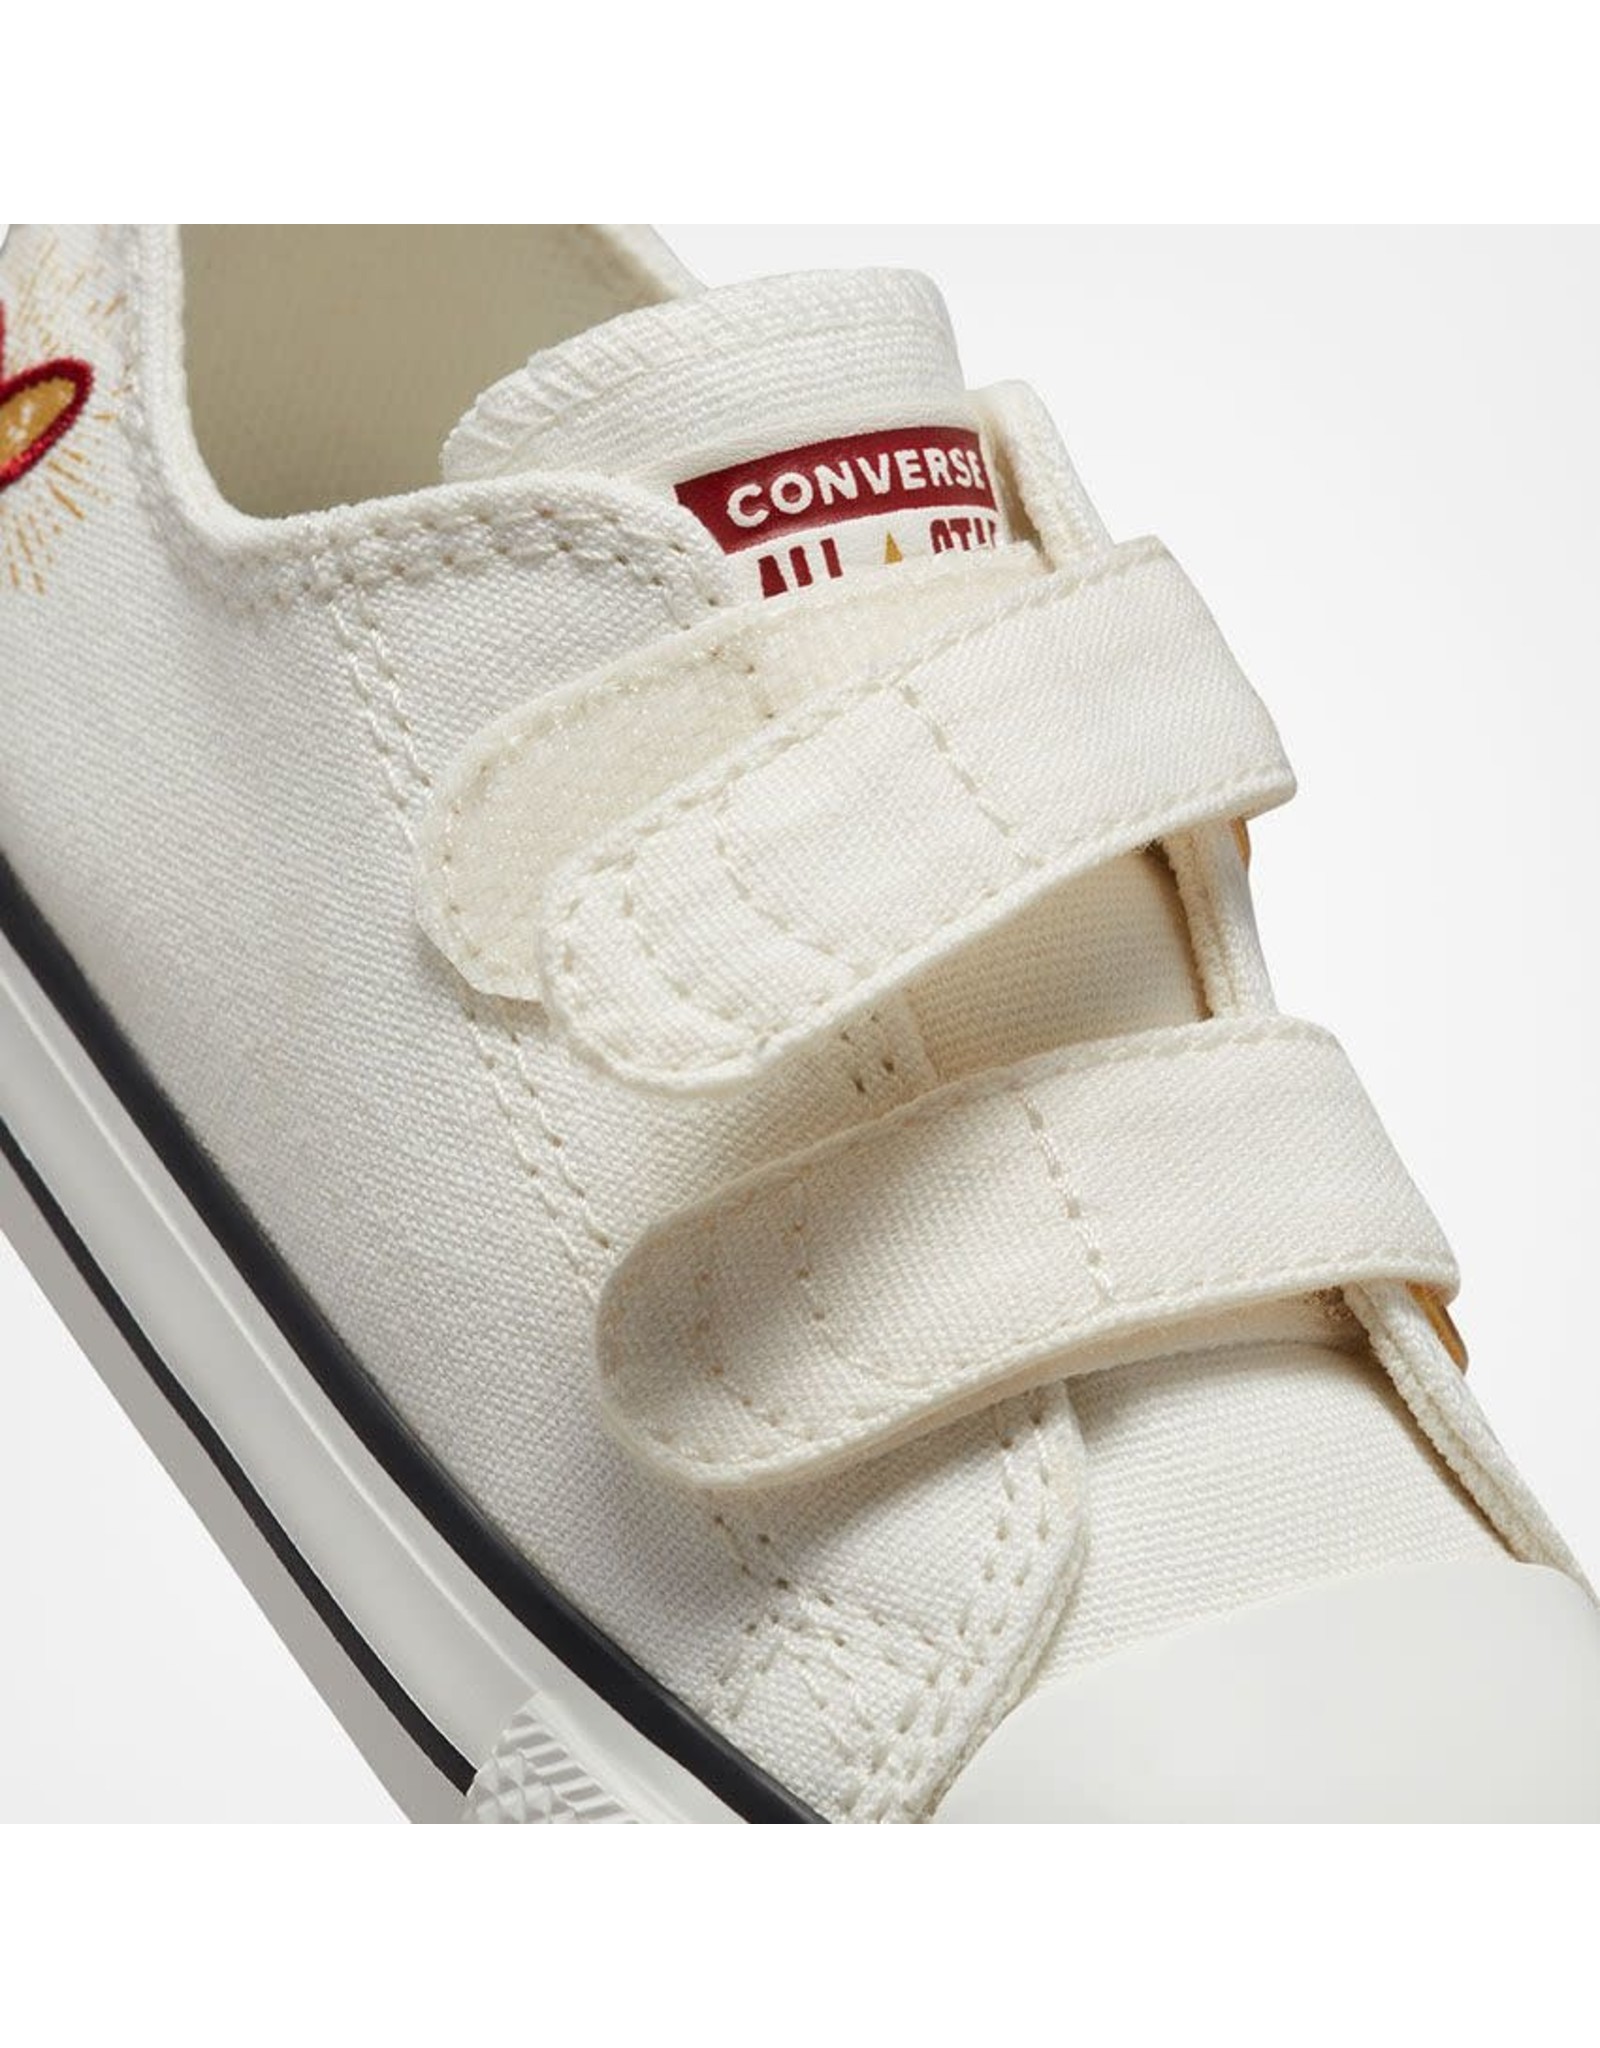 CHUCK TAYLOR 2V OX VINTAGE WHITE COLOW - A04952C